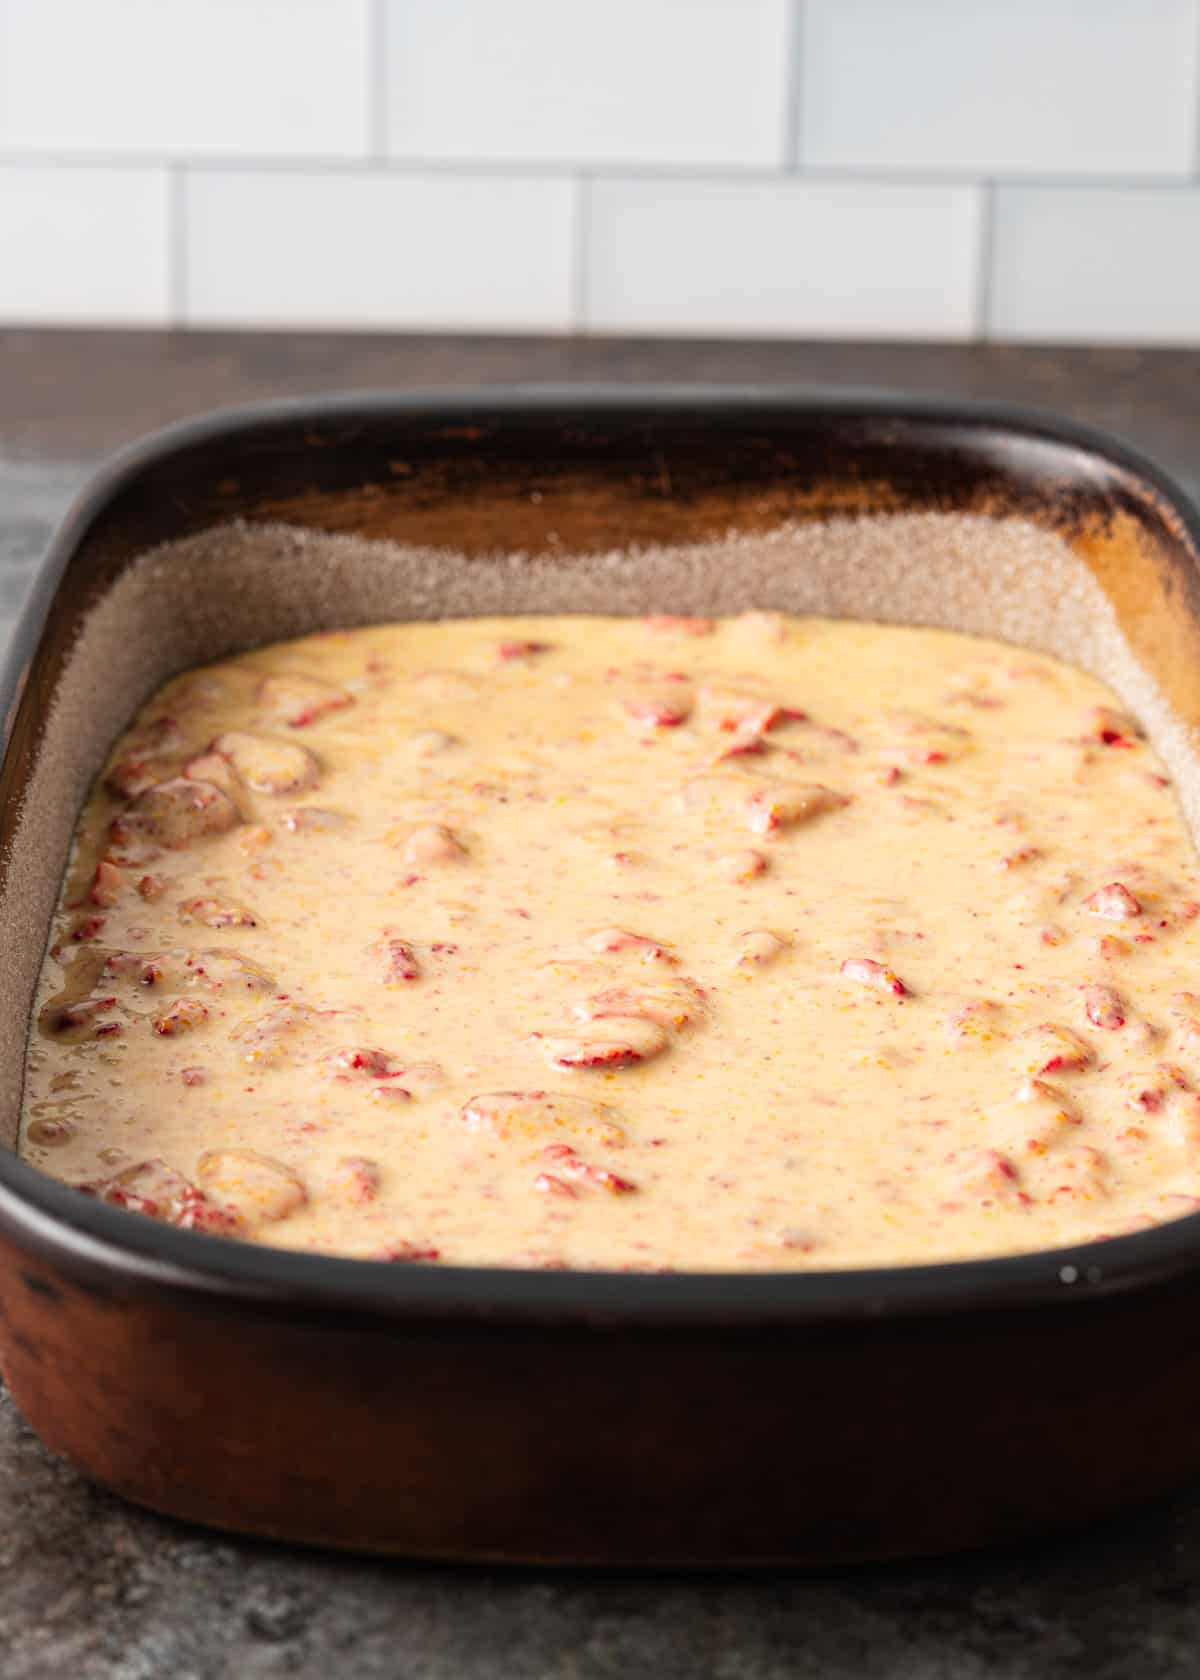 side view: cornmeal cake batter in a baking dish